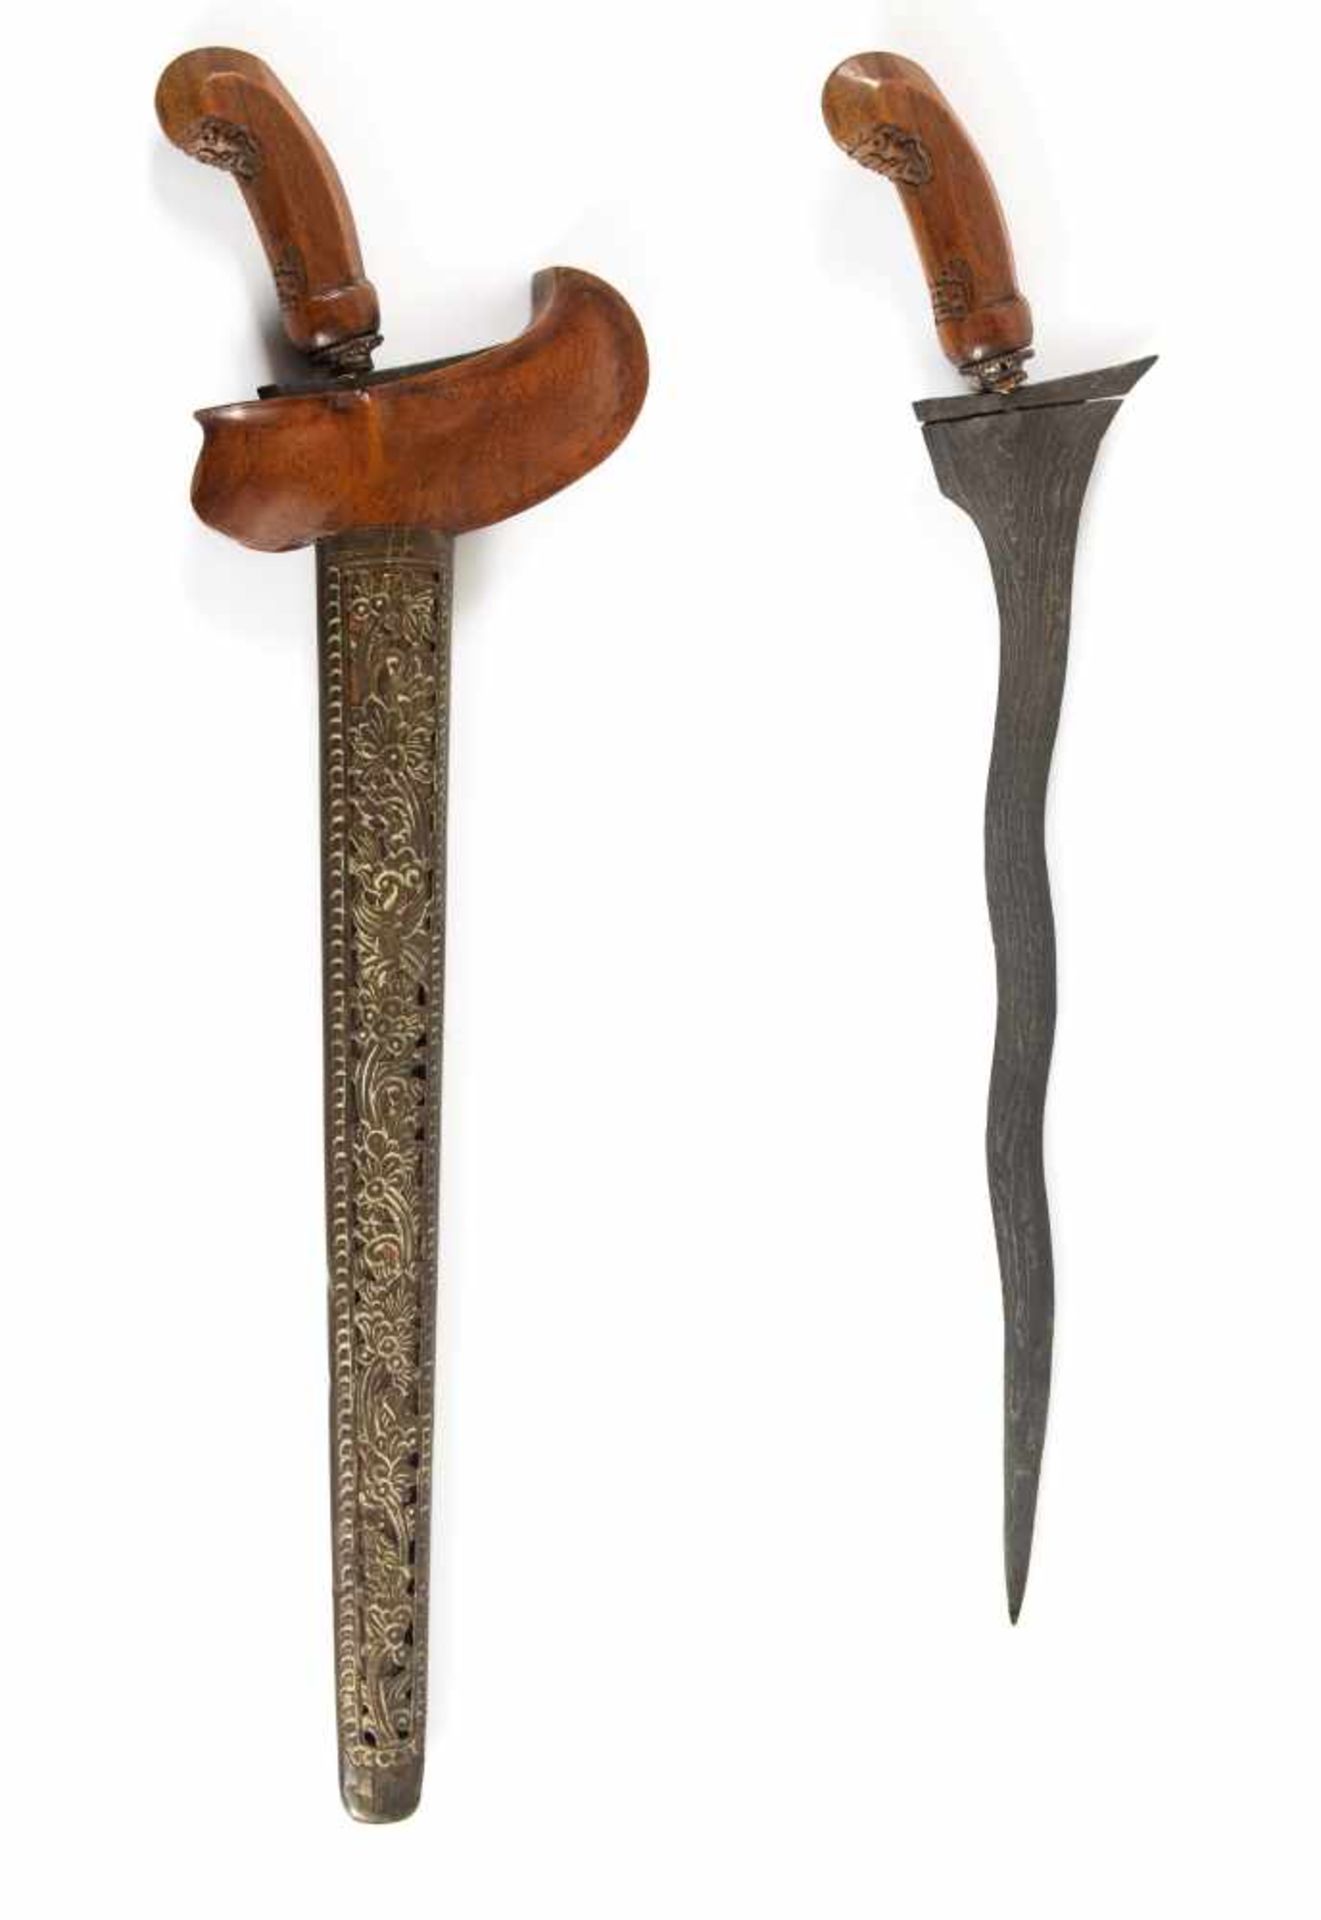 A Javanese Keris, with 15th century blade.A Javanese Keris, with 15th century blade.Umur (age): From